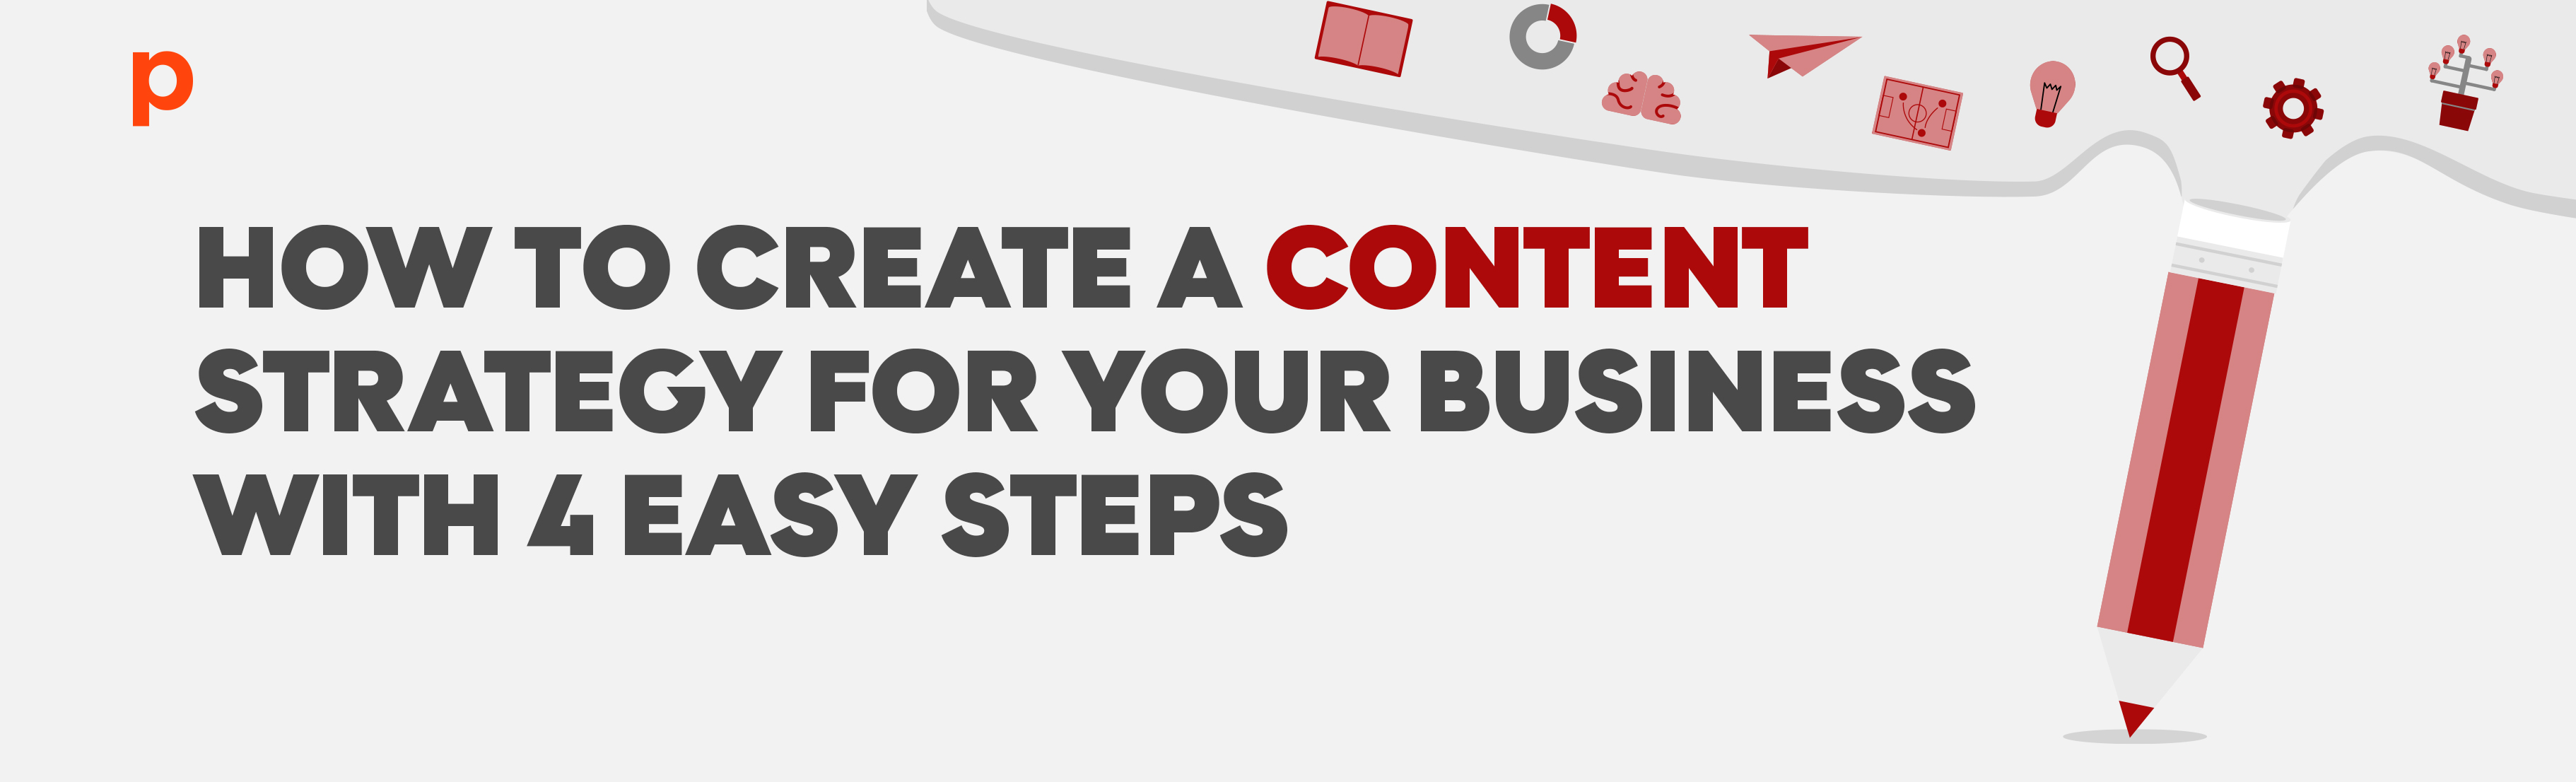 How To Create a Content Strategy for Your Business with 4 Easy Steps